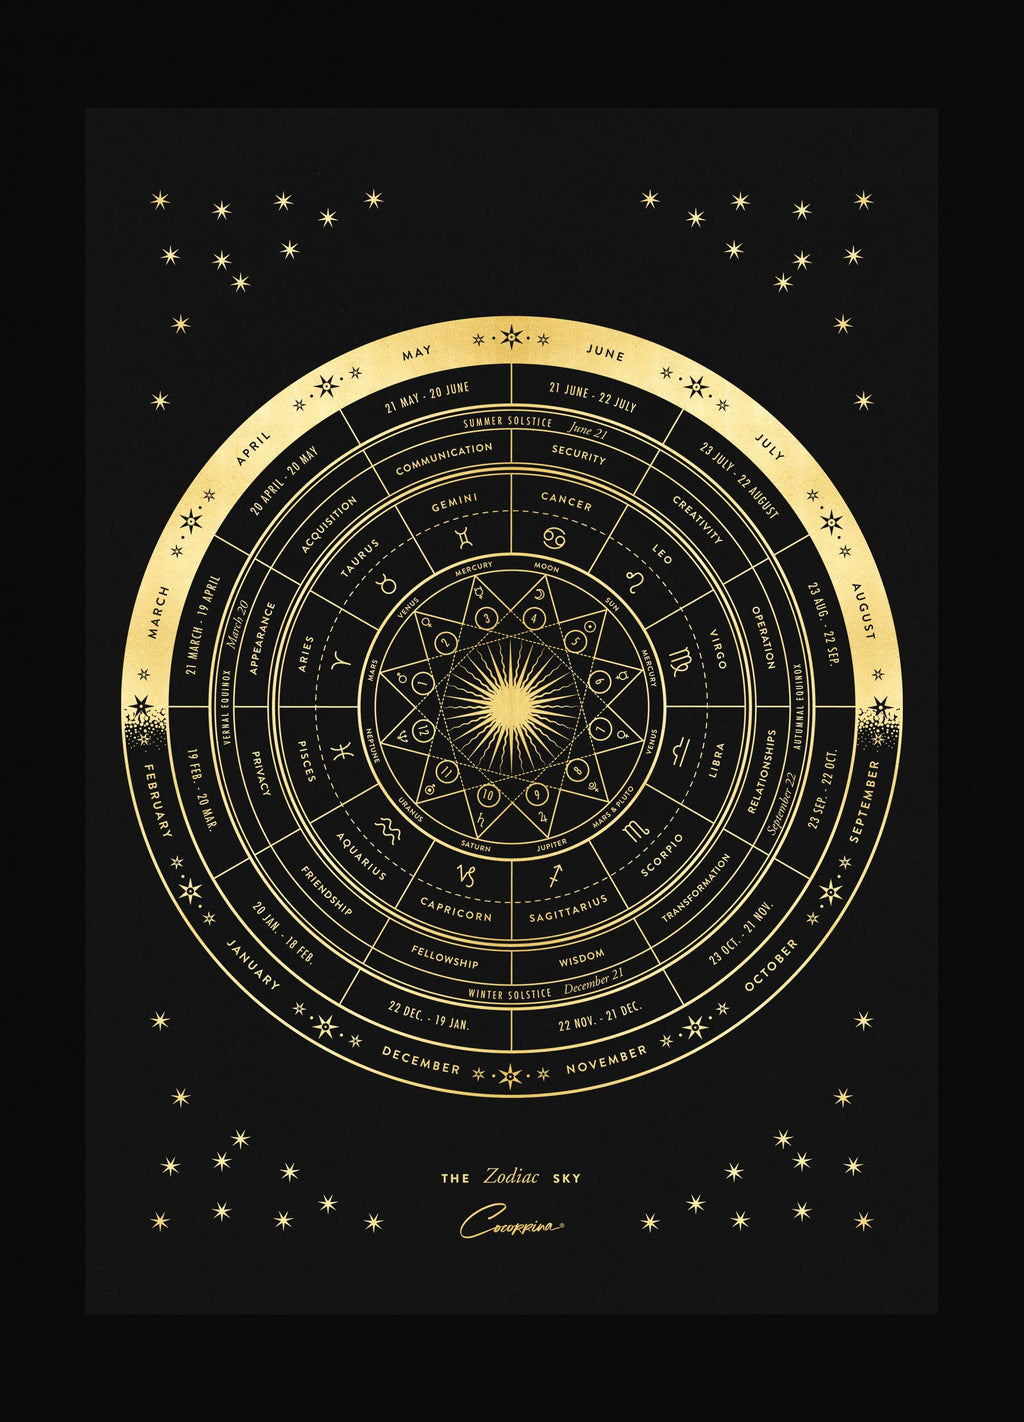 The Zodiac Sky, a Zodiac Wheel of the signs, planets, attributes and houses by Cocorrina & Co a Print in gold foil on black paper